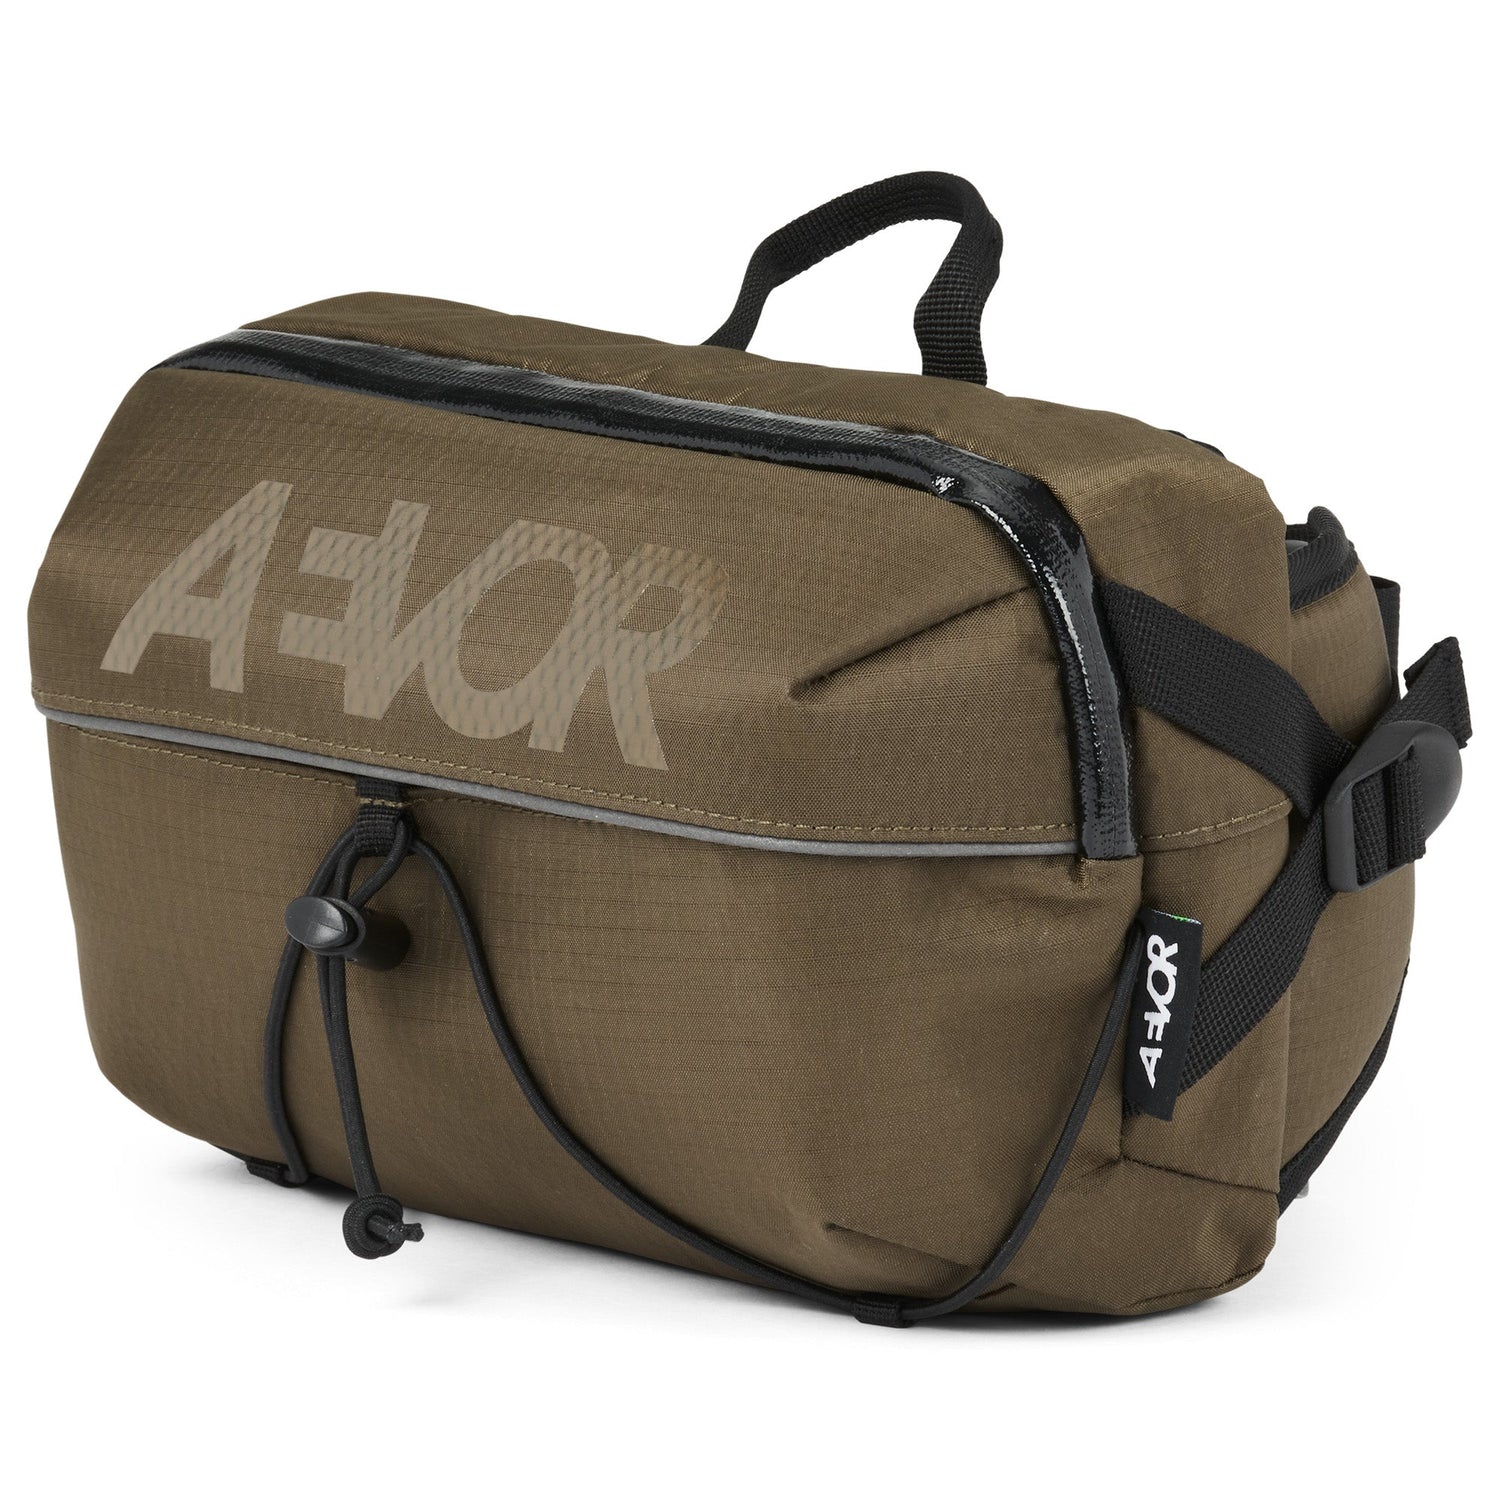 Aevor Bar Bag Proof - Made from 100 % Recycled PET Olive Gold Bags